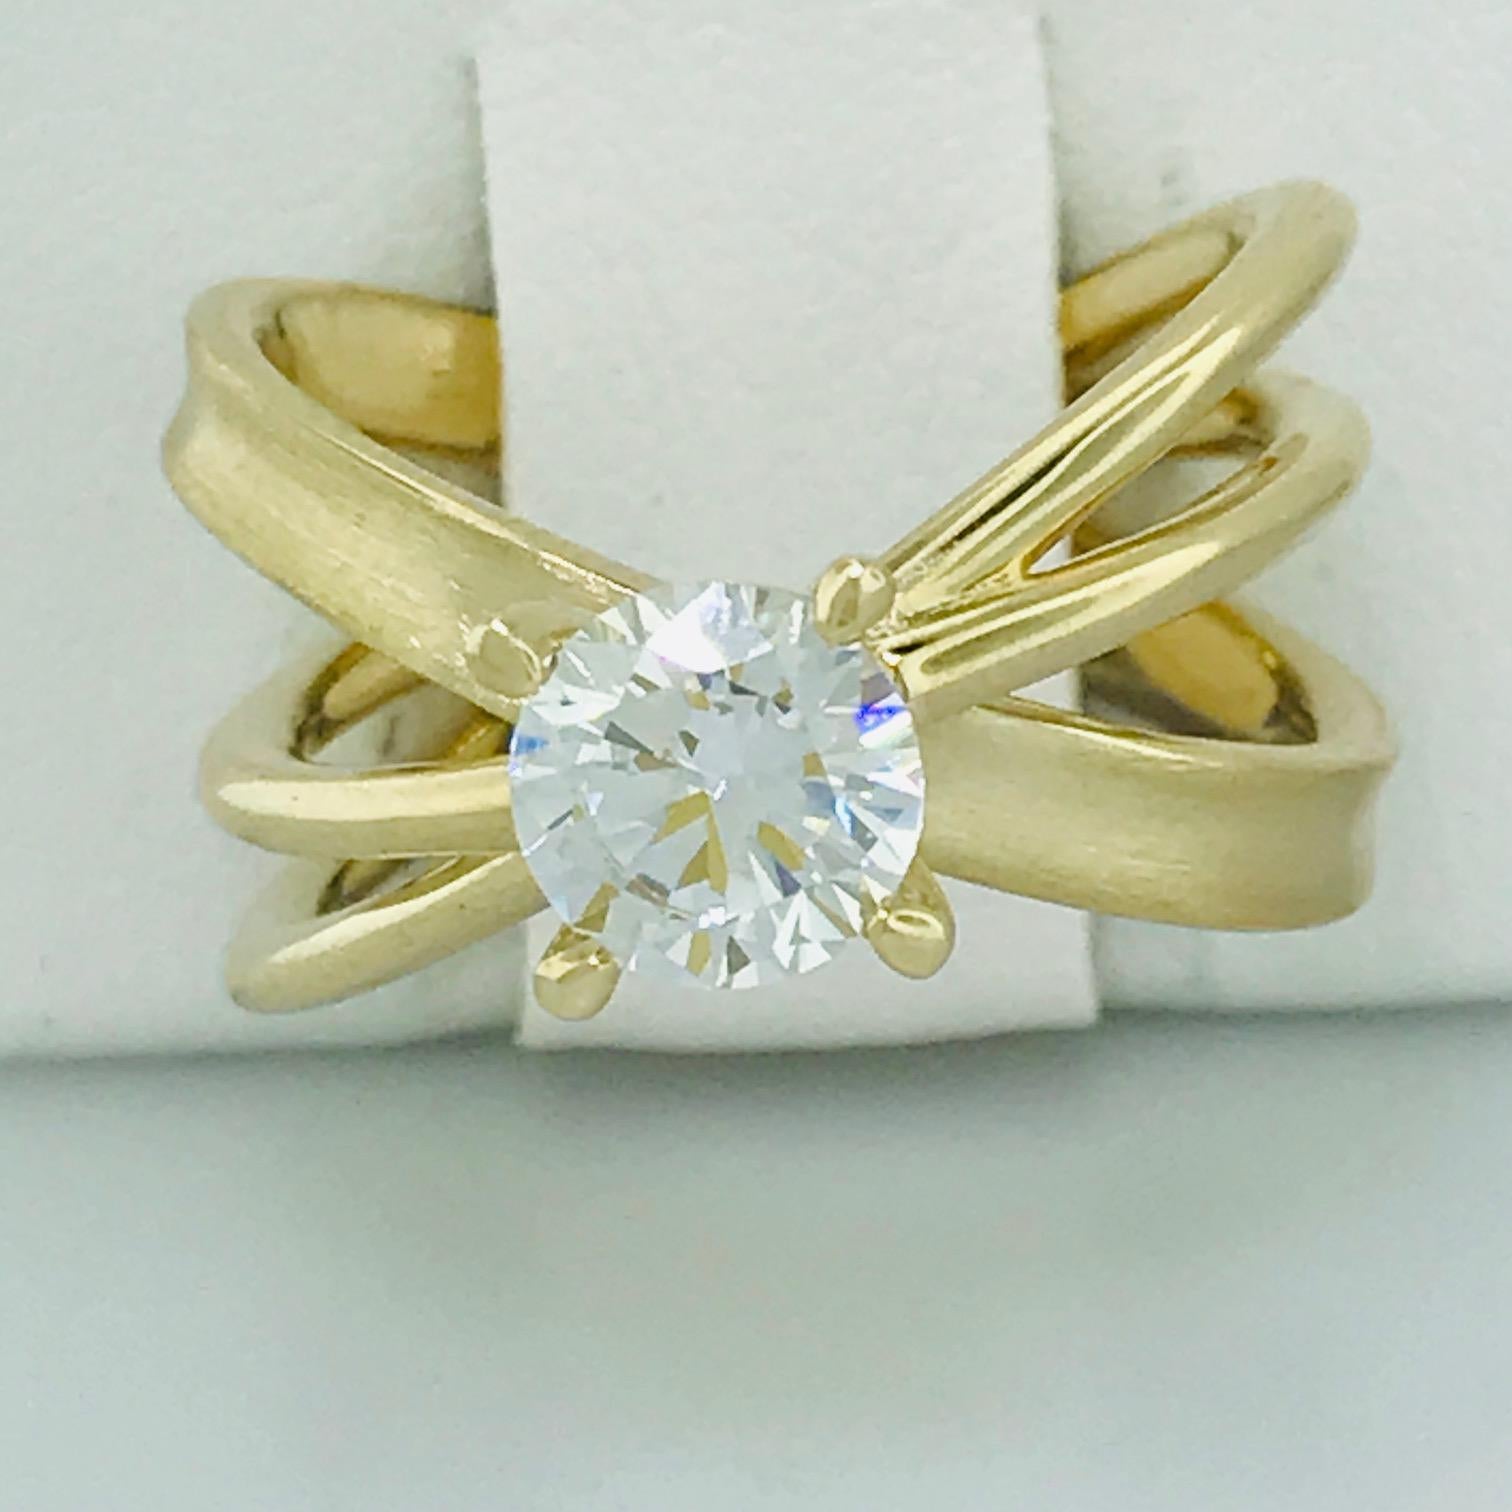 A bold and unique ring perfect for the innovative and elegant bride. This X ring is a fashion engagement ring with a mix of high polish and satin finish. This mounting was made to hold a 6.5 mm round stone (1.00 carat diamond) but does not come with